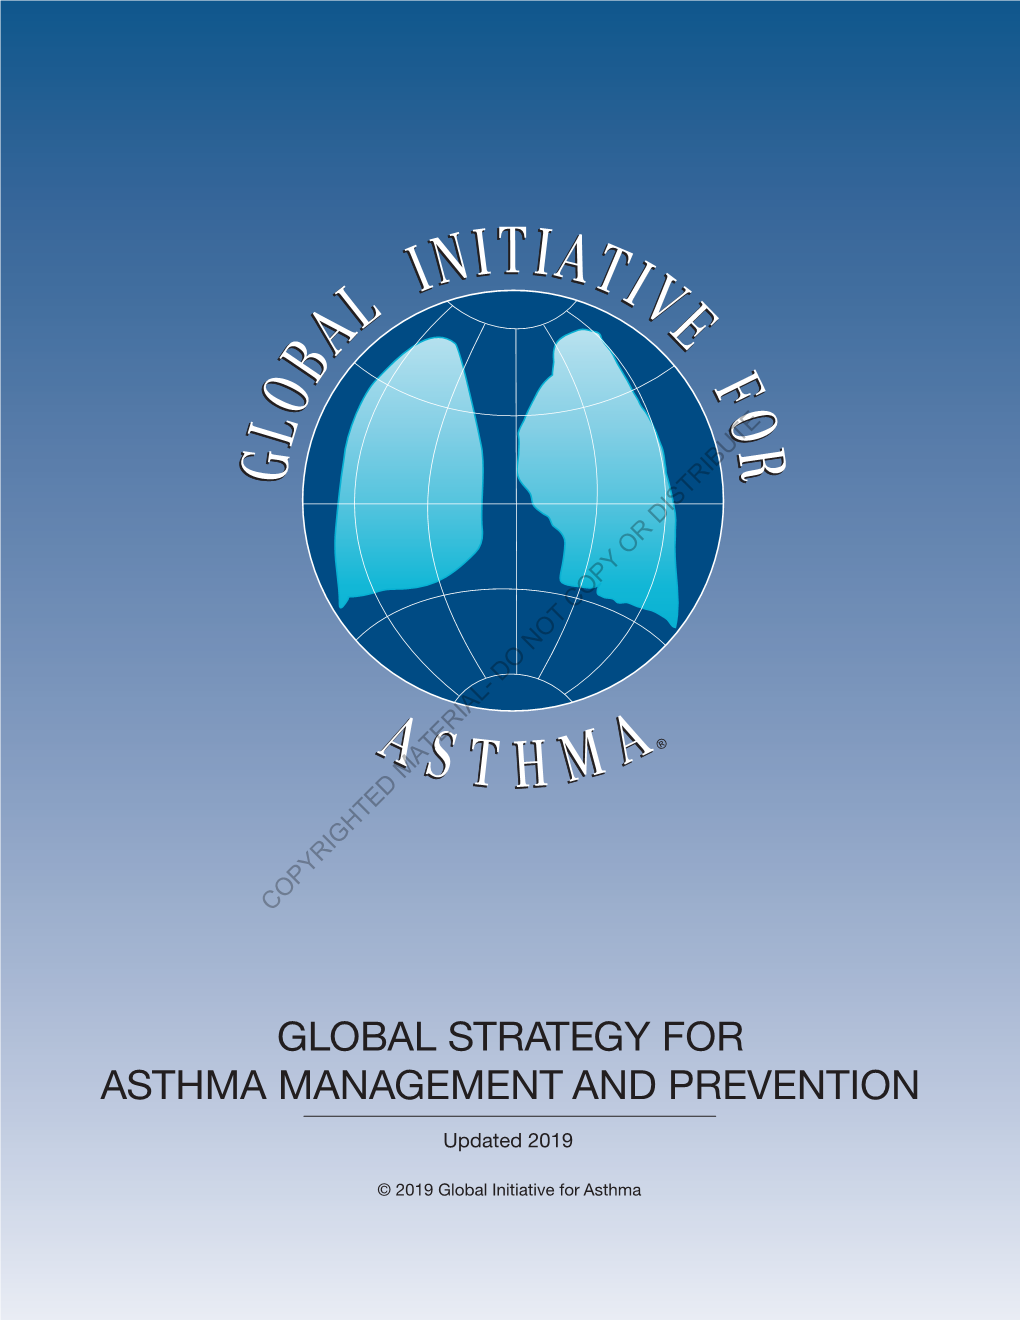 Global Strategy for Asthma Management and Prevention, 2019. Available From